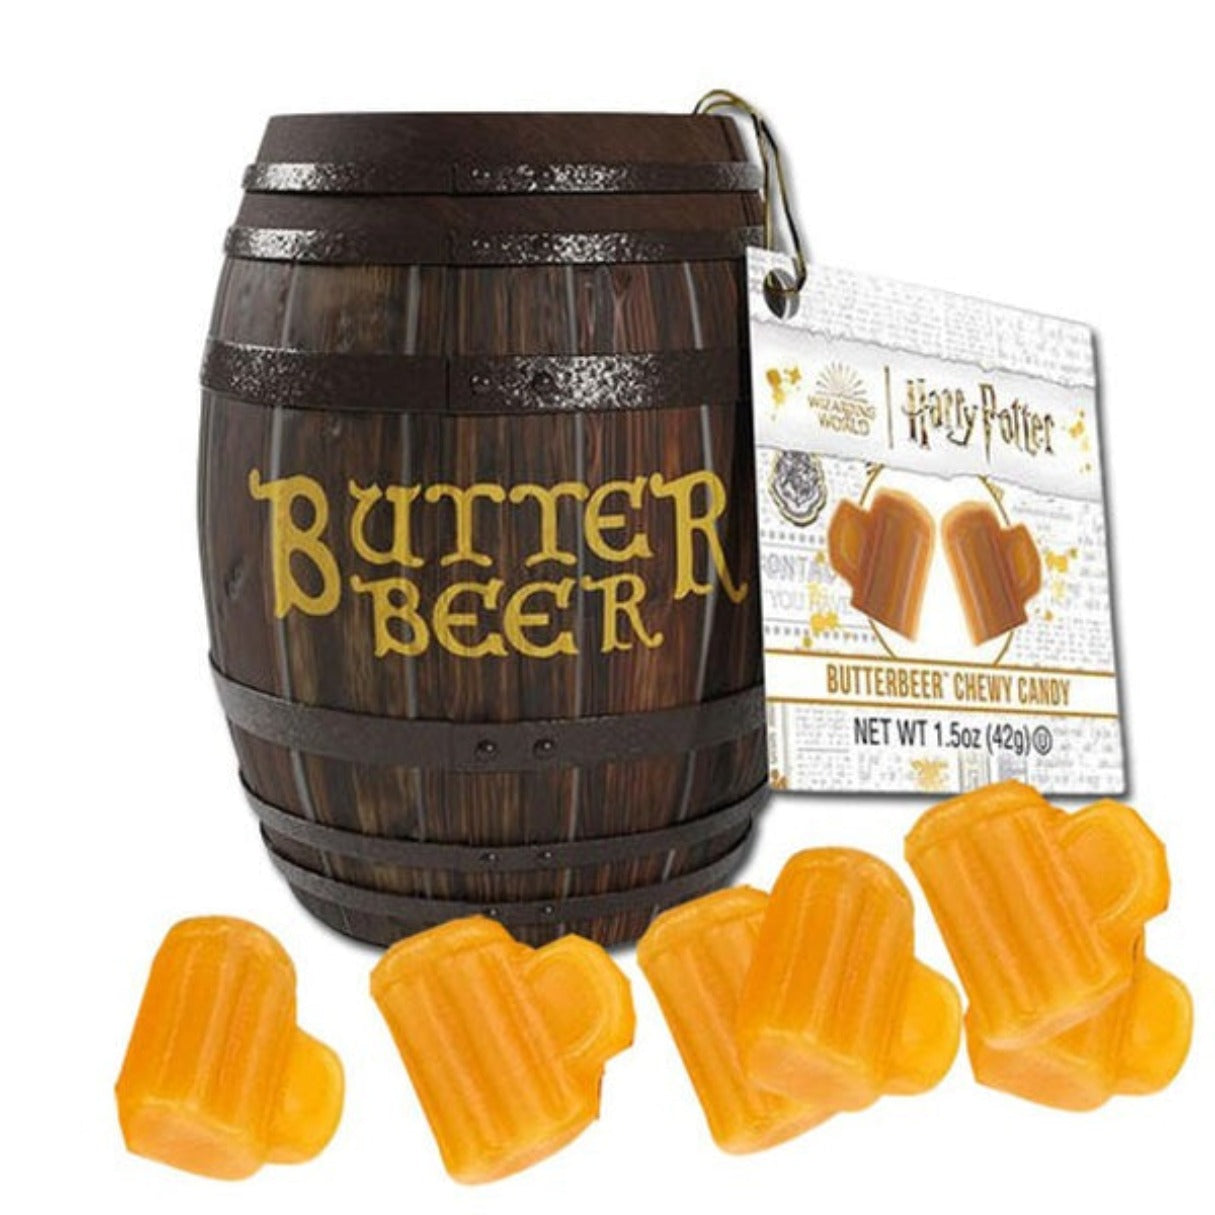 Harry Potter Butter Beer Barrel Chewy Candy Tin 1.5oz - 24ct